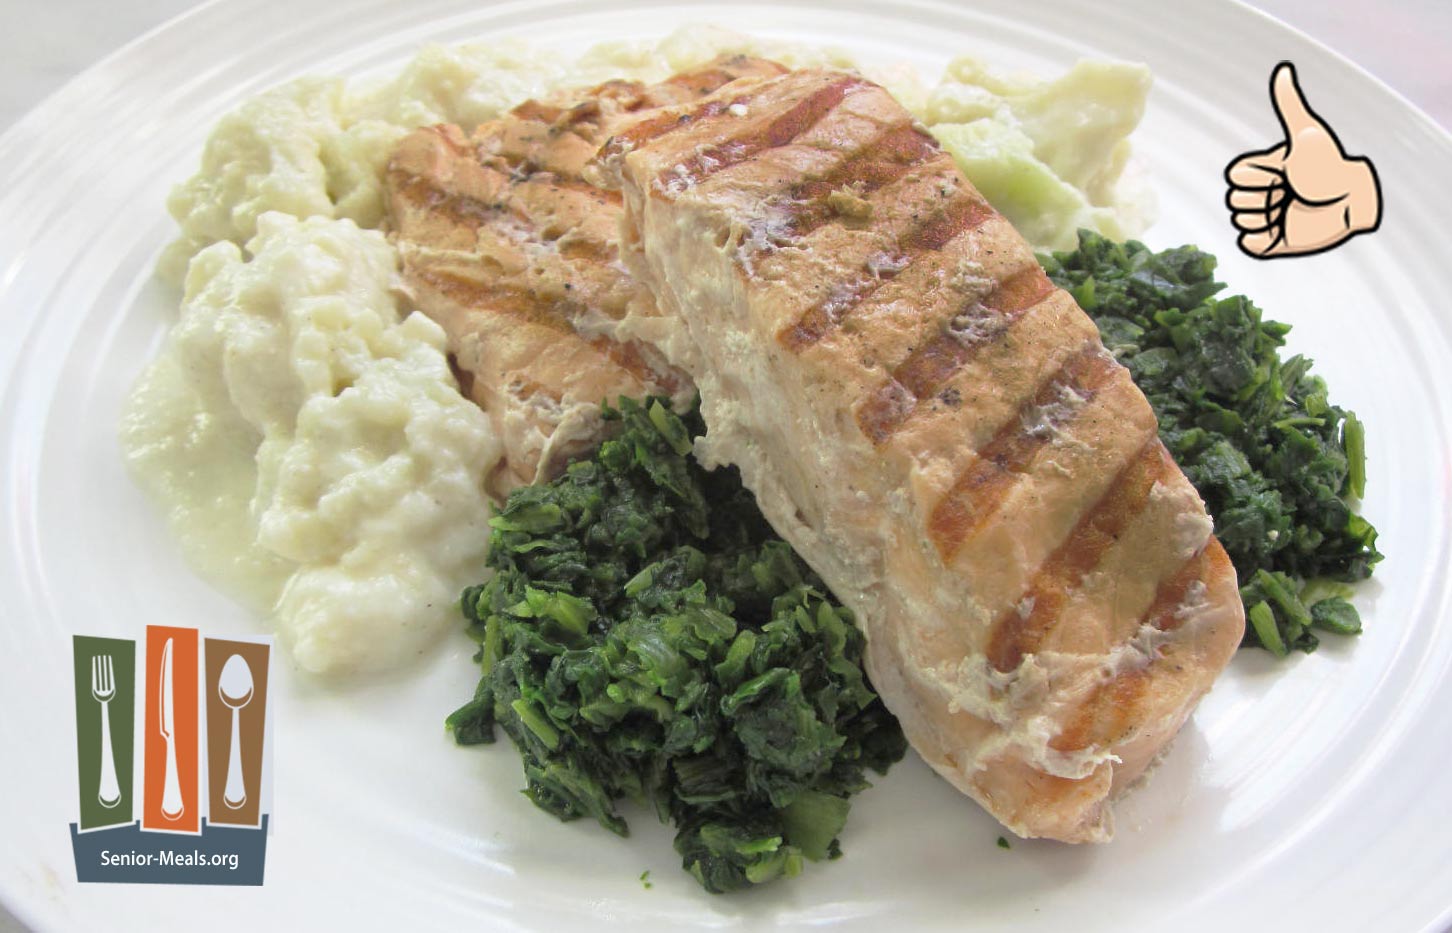 Grilled Salmon with Cauliflower Au Gratin and Sous-Vide Spinach - $13